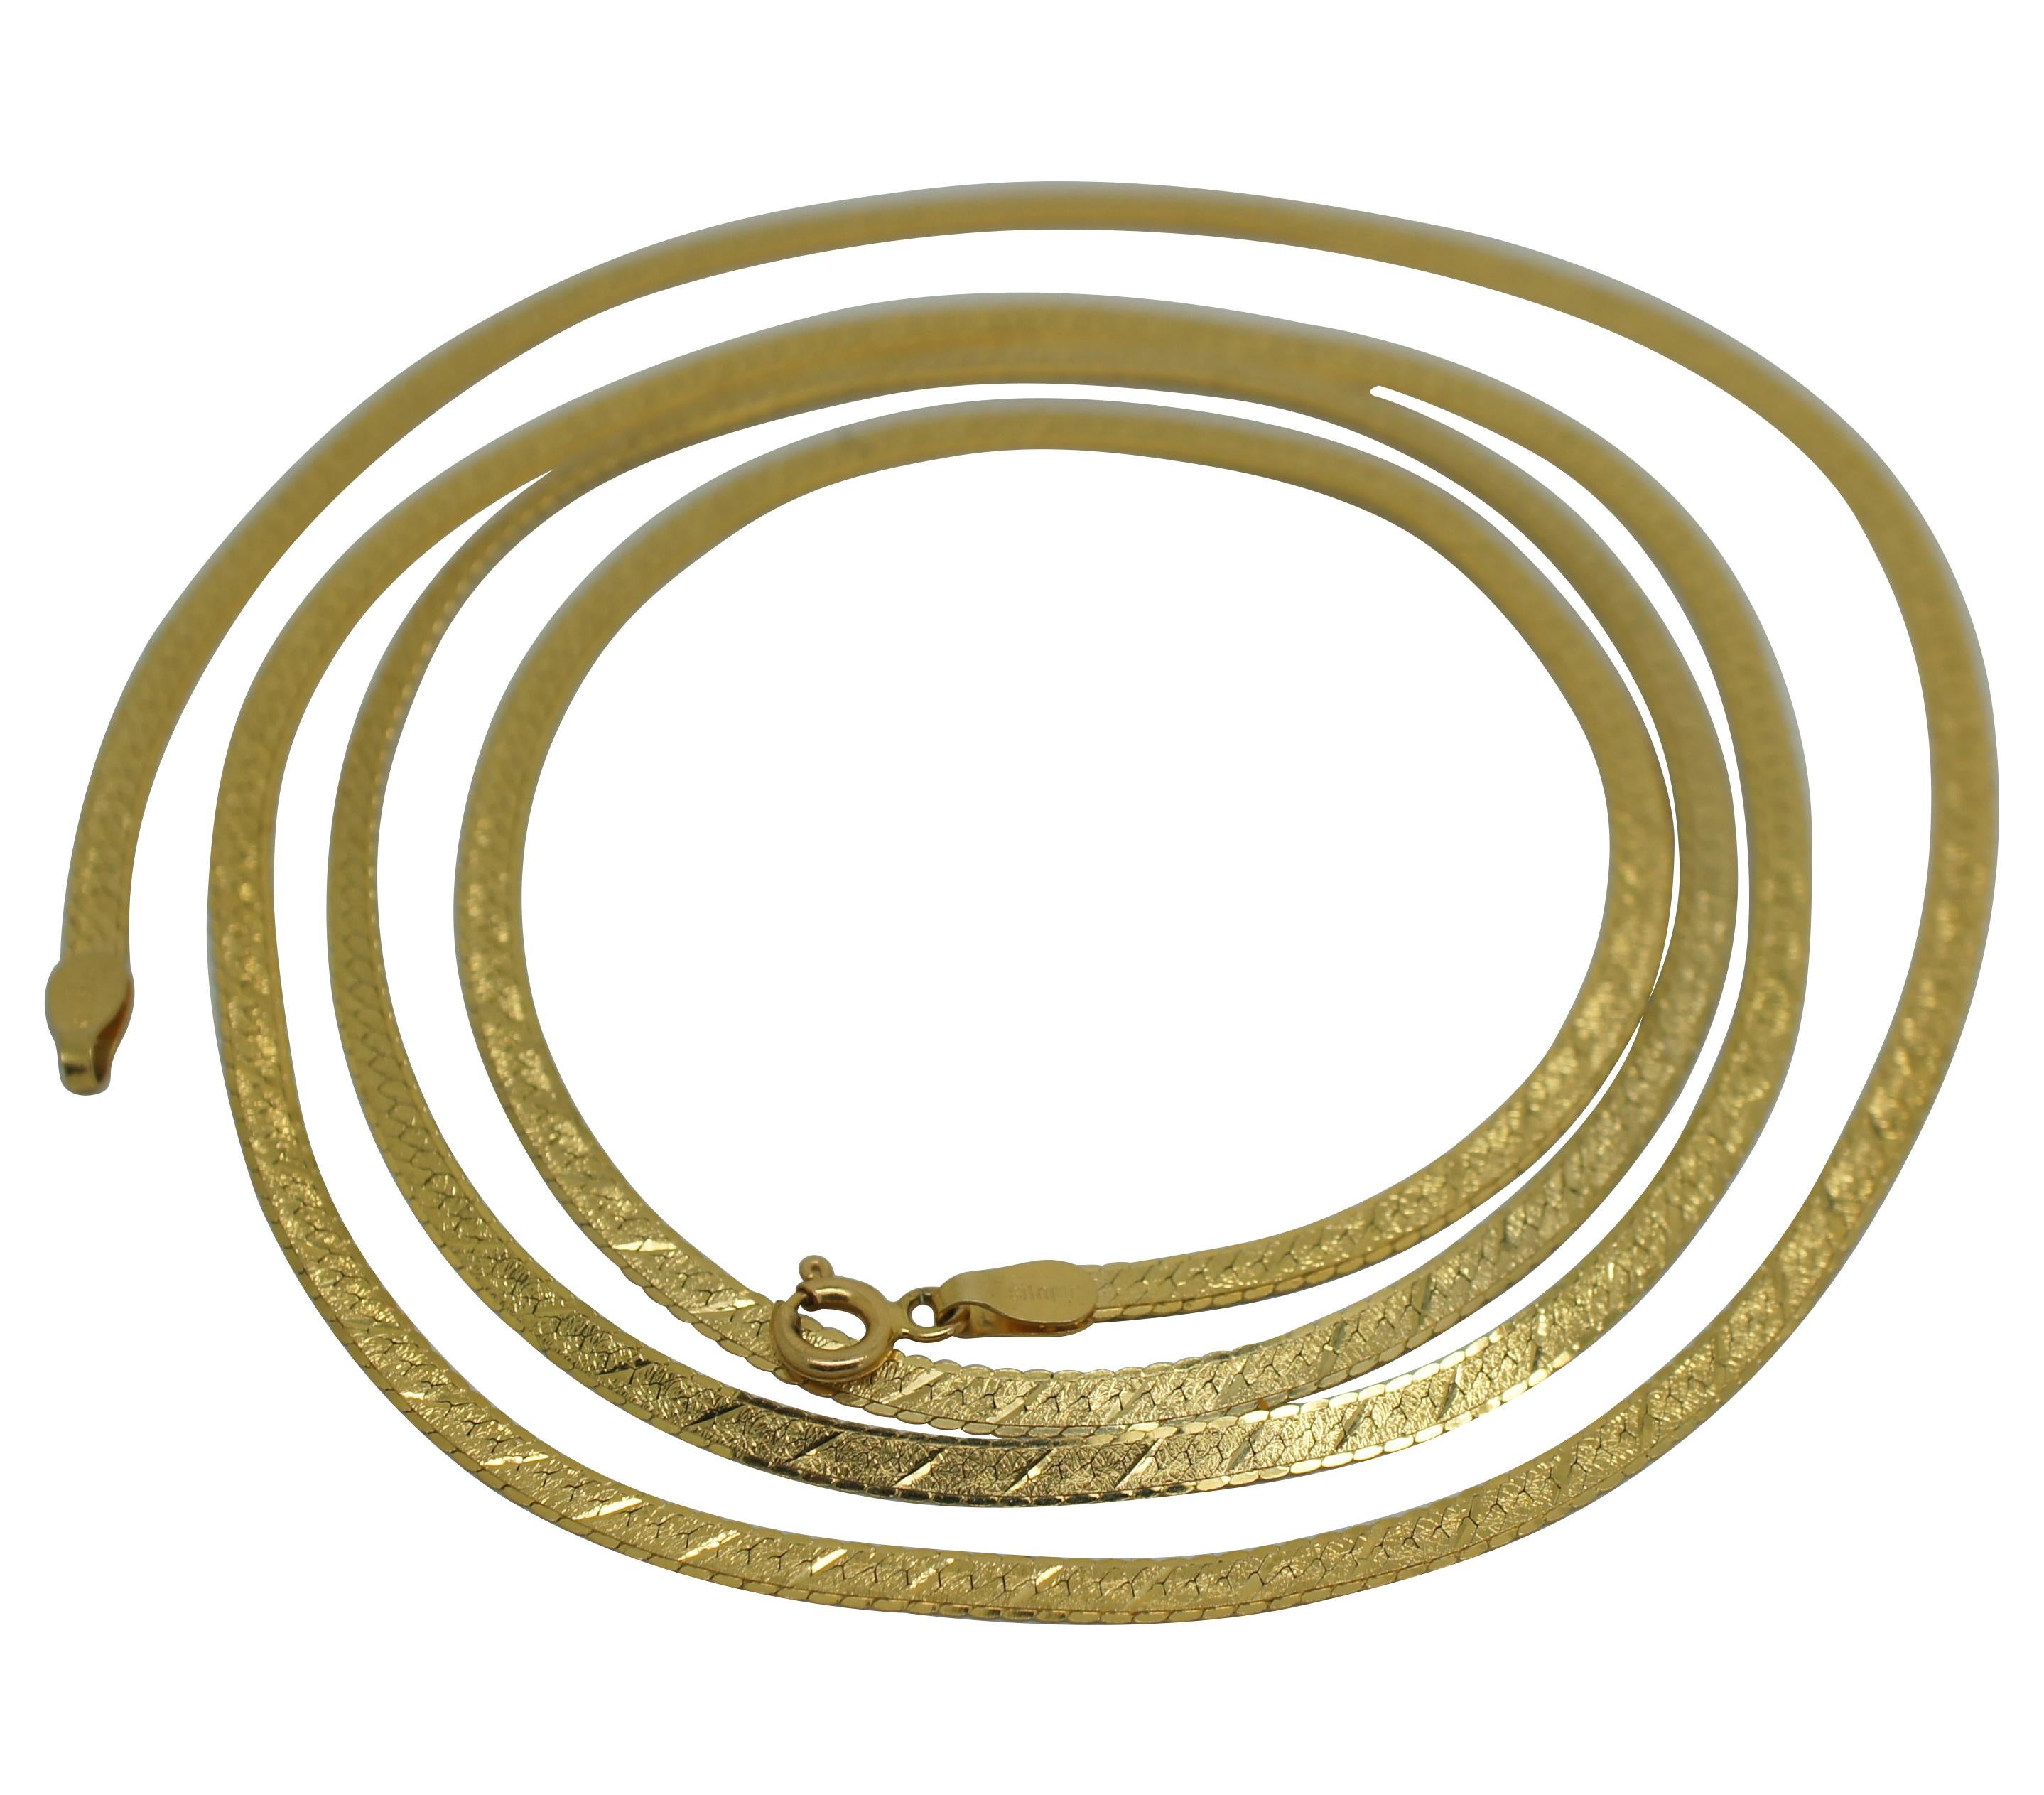 Vintage Silmar 14k yellow gold flat chain necklace in the herringbone design with a decorative texture and scalloped edge; spring ring clasp. Made in Italy.

30” x 0.125” / 3mm (Length x Width) / 8 g